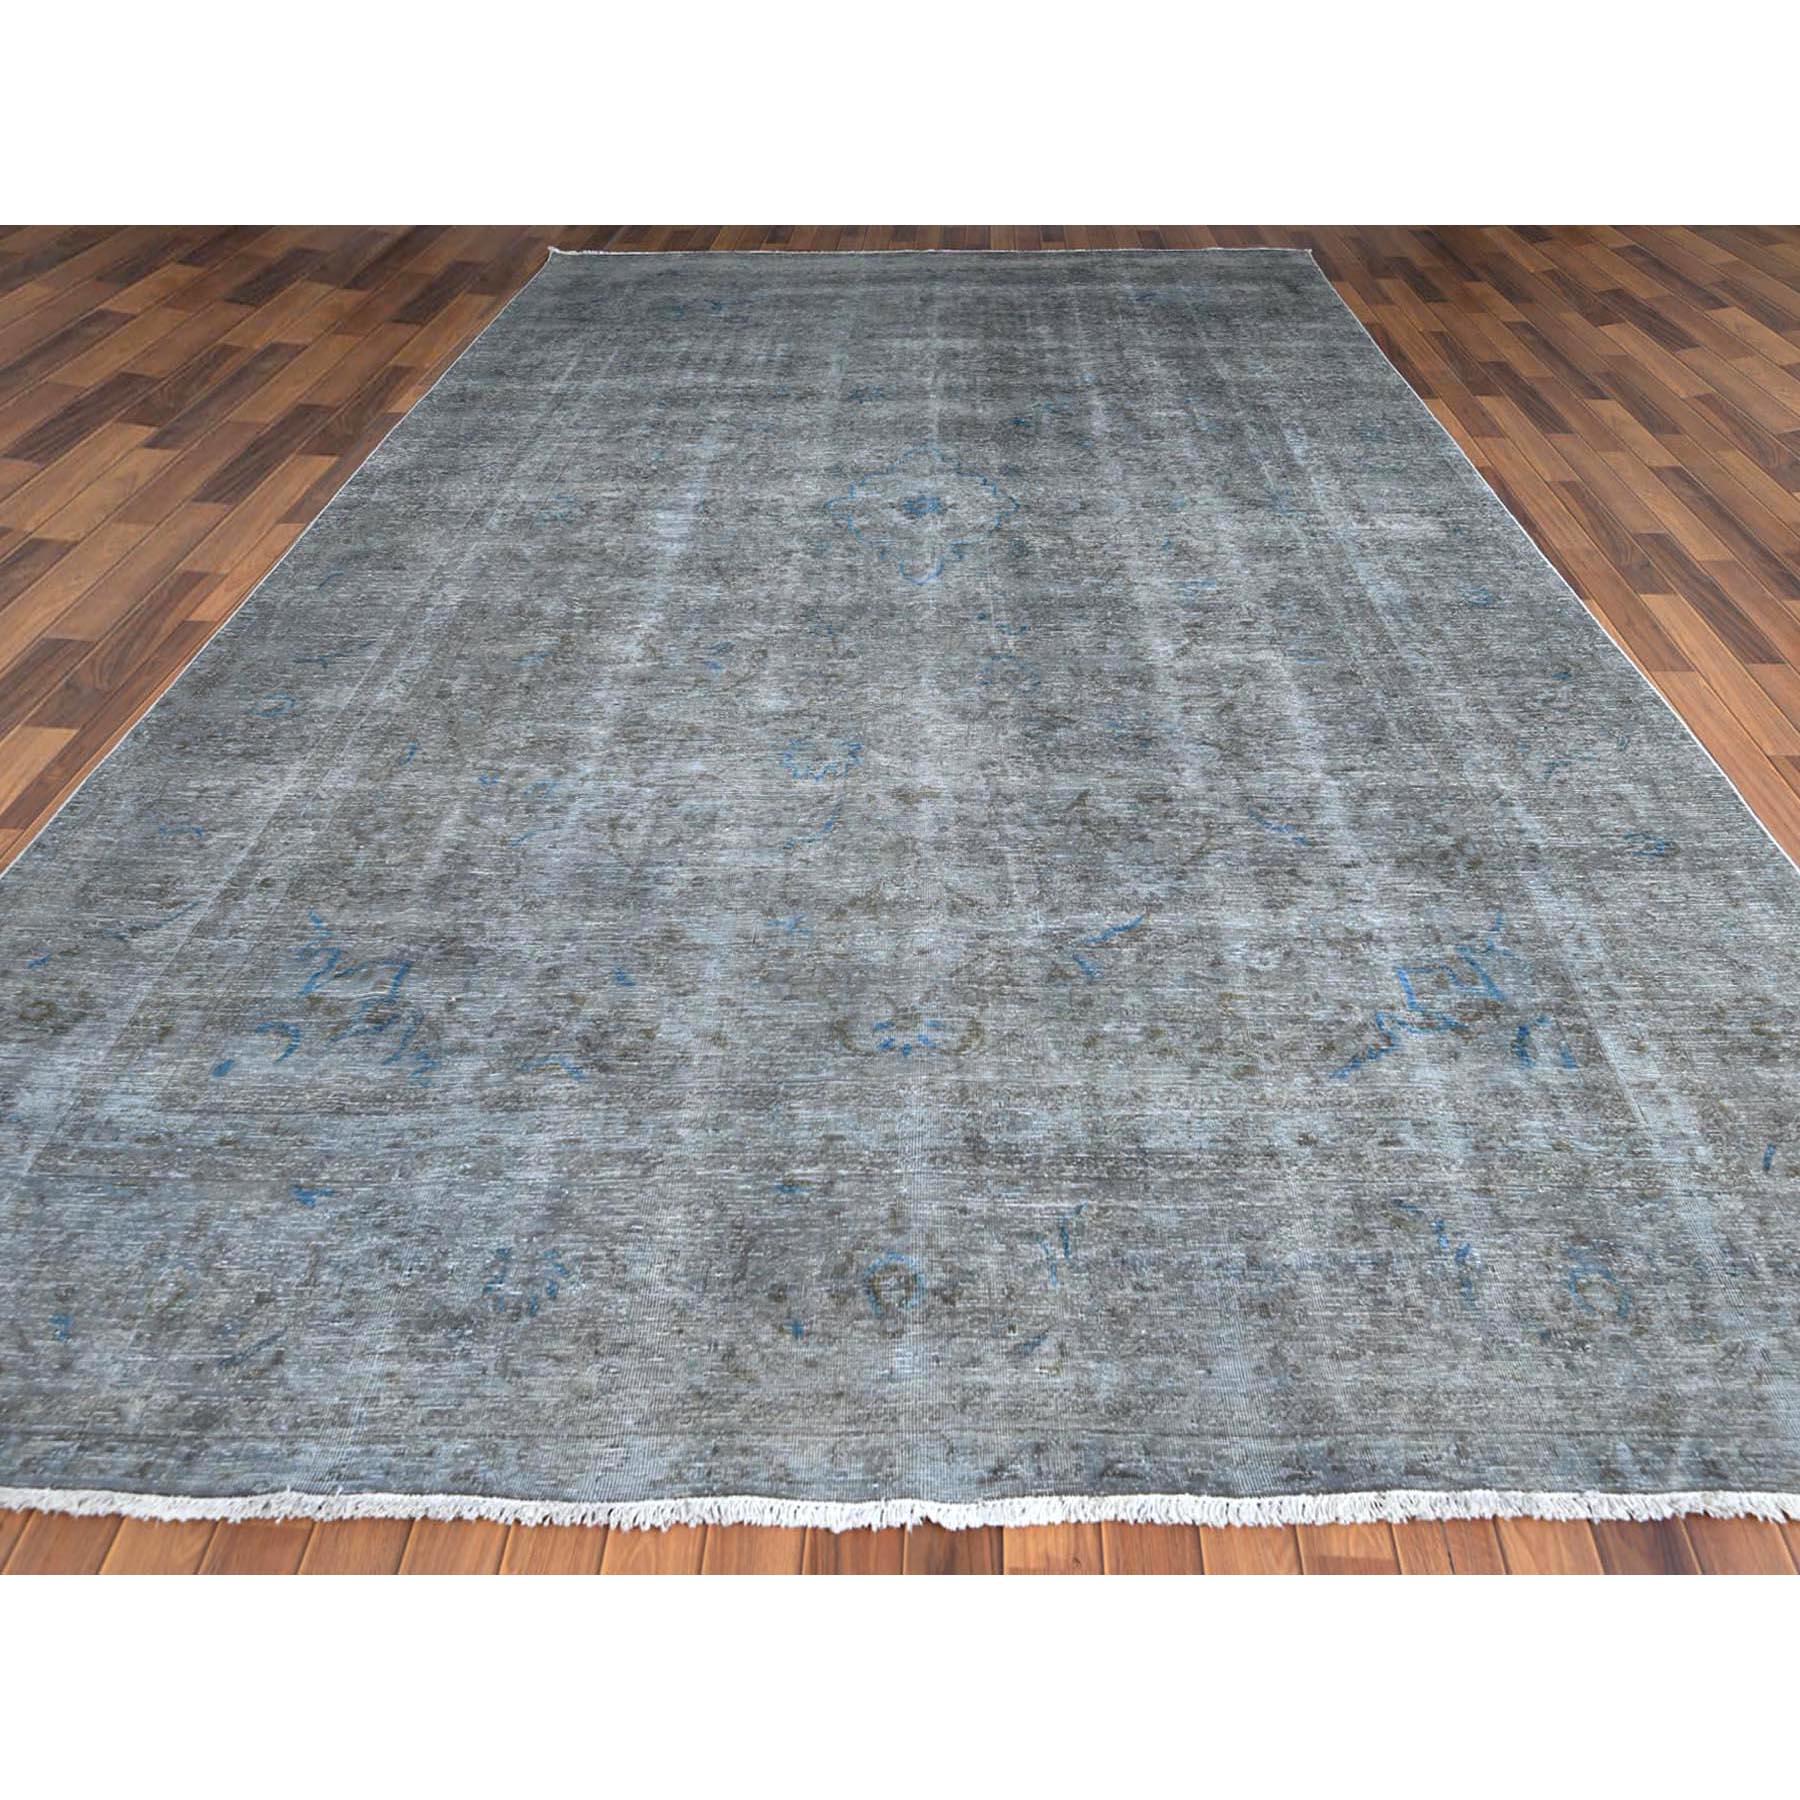 Medieval Grey Bohemian Old Persian Tabriz Design Hand Knotted Oriental Rug